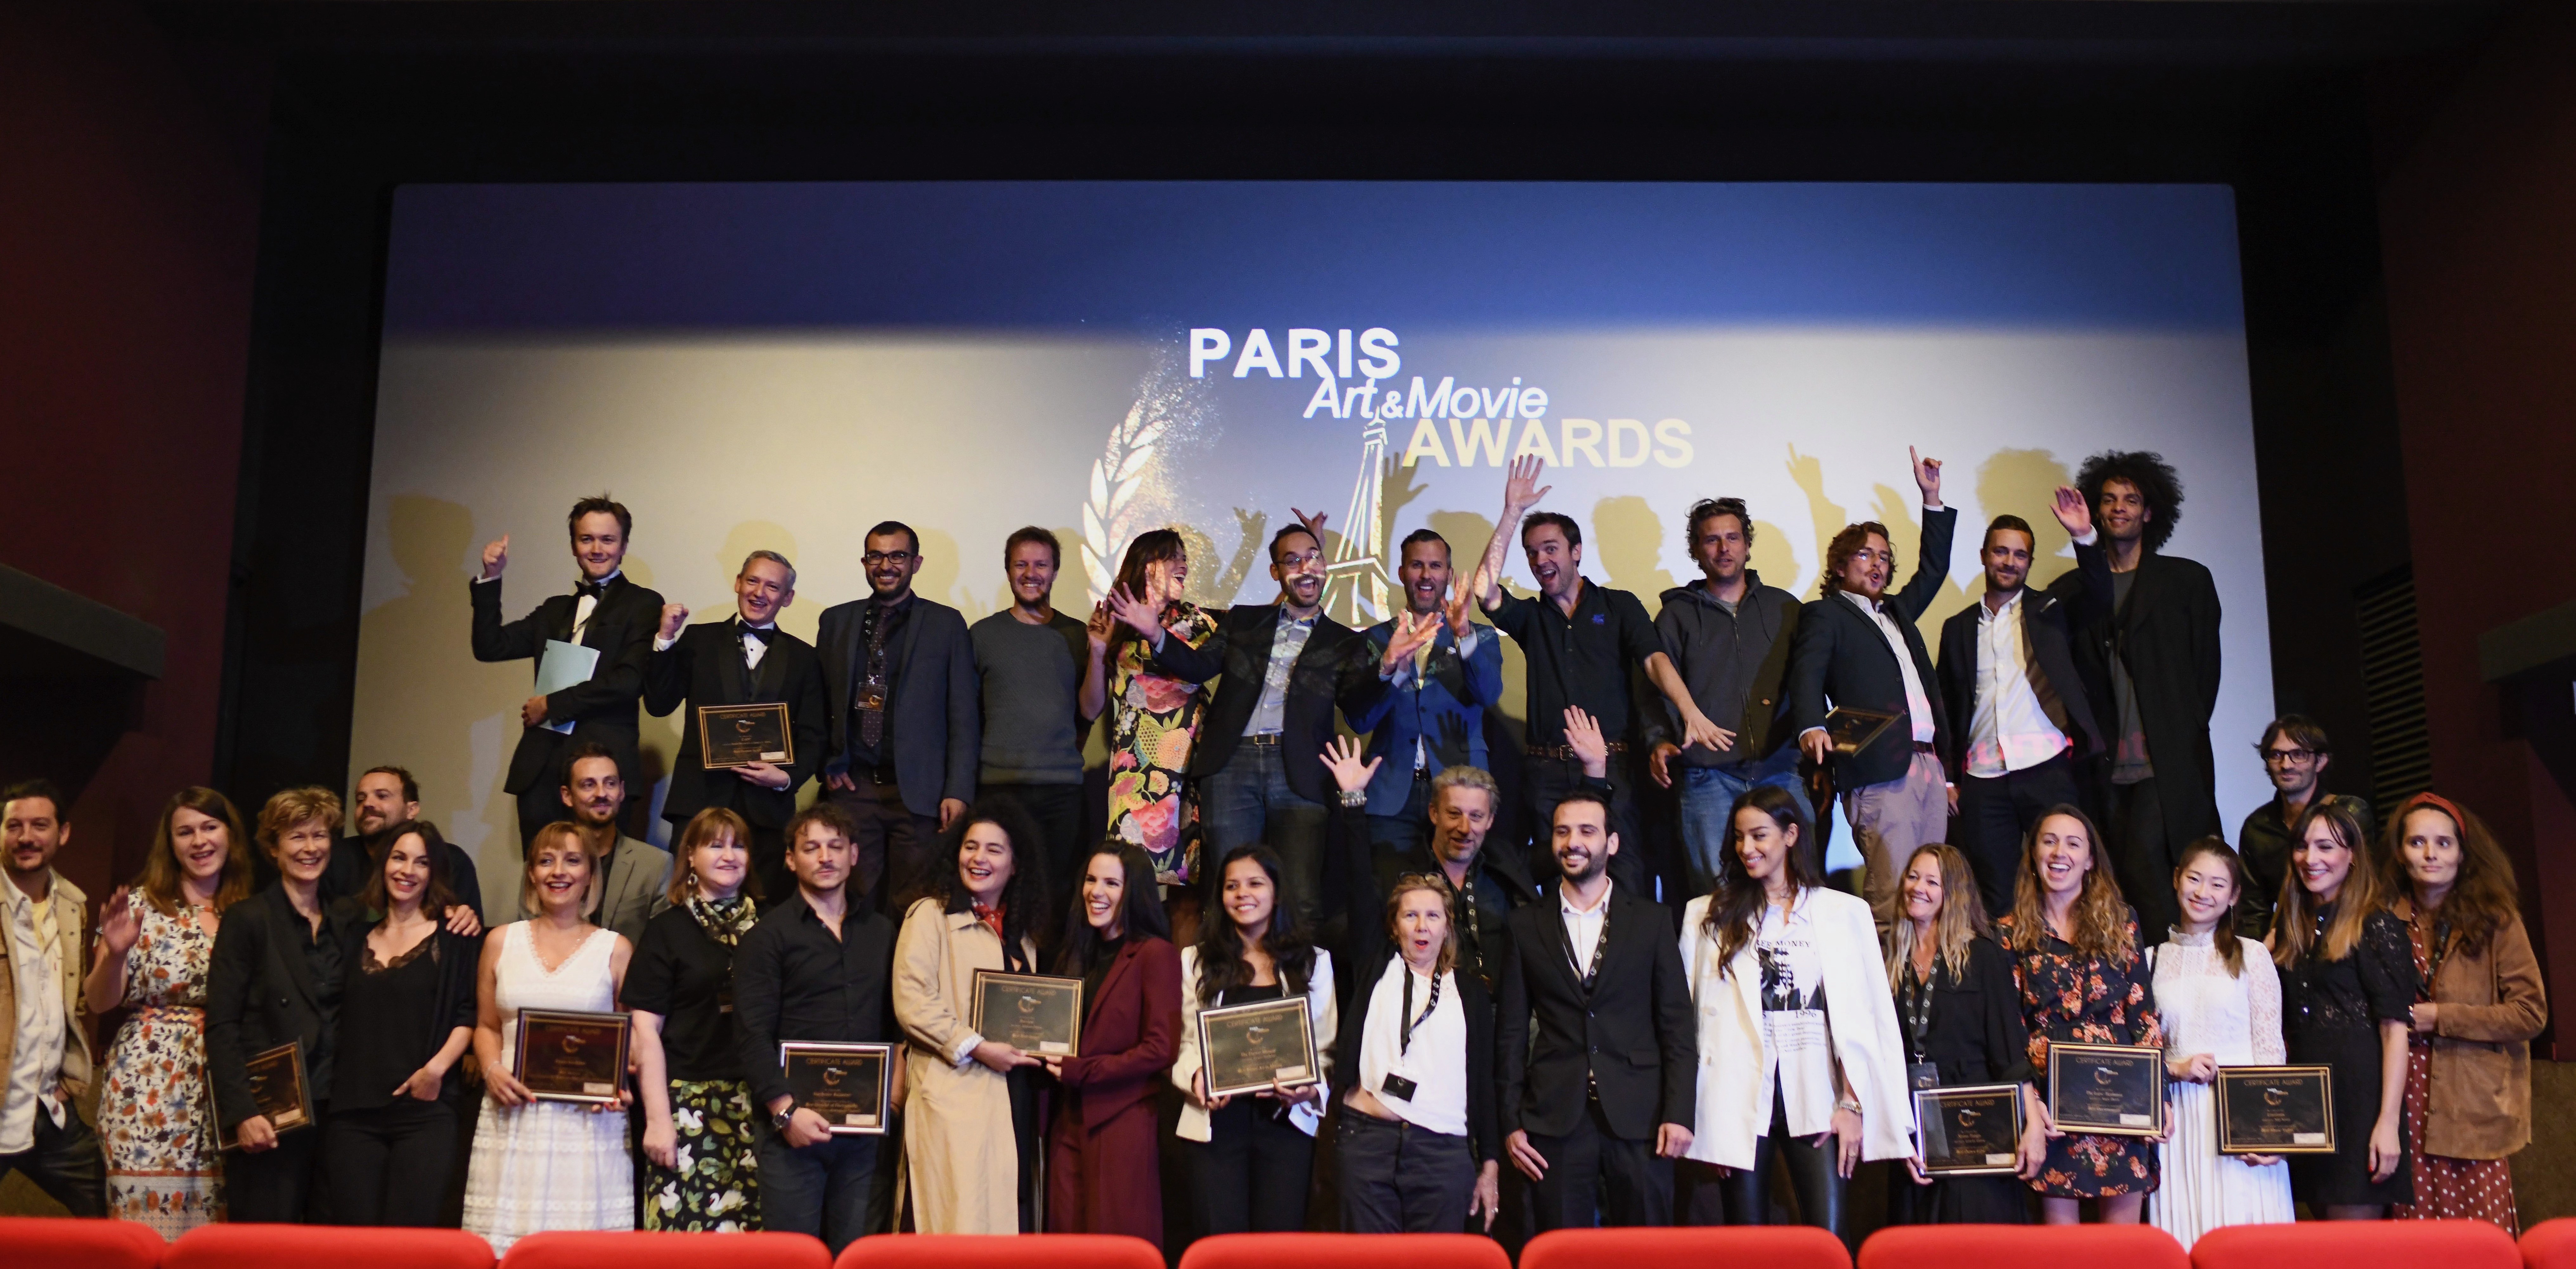 The Paris Art & Movie Awards Film Festival is Back in Person as a Summer Event